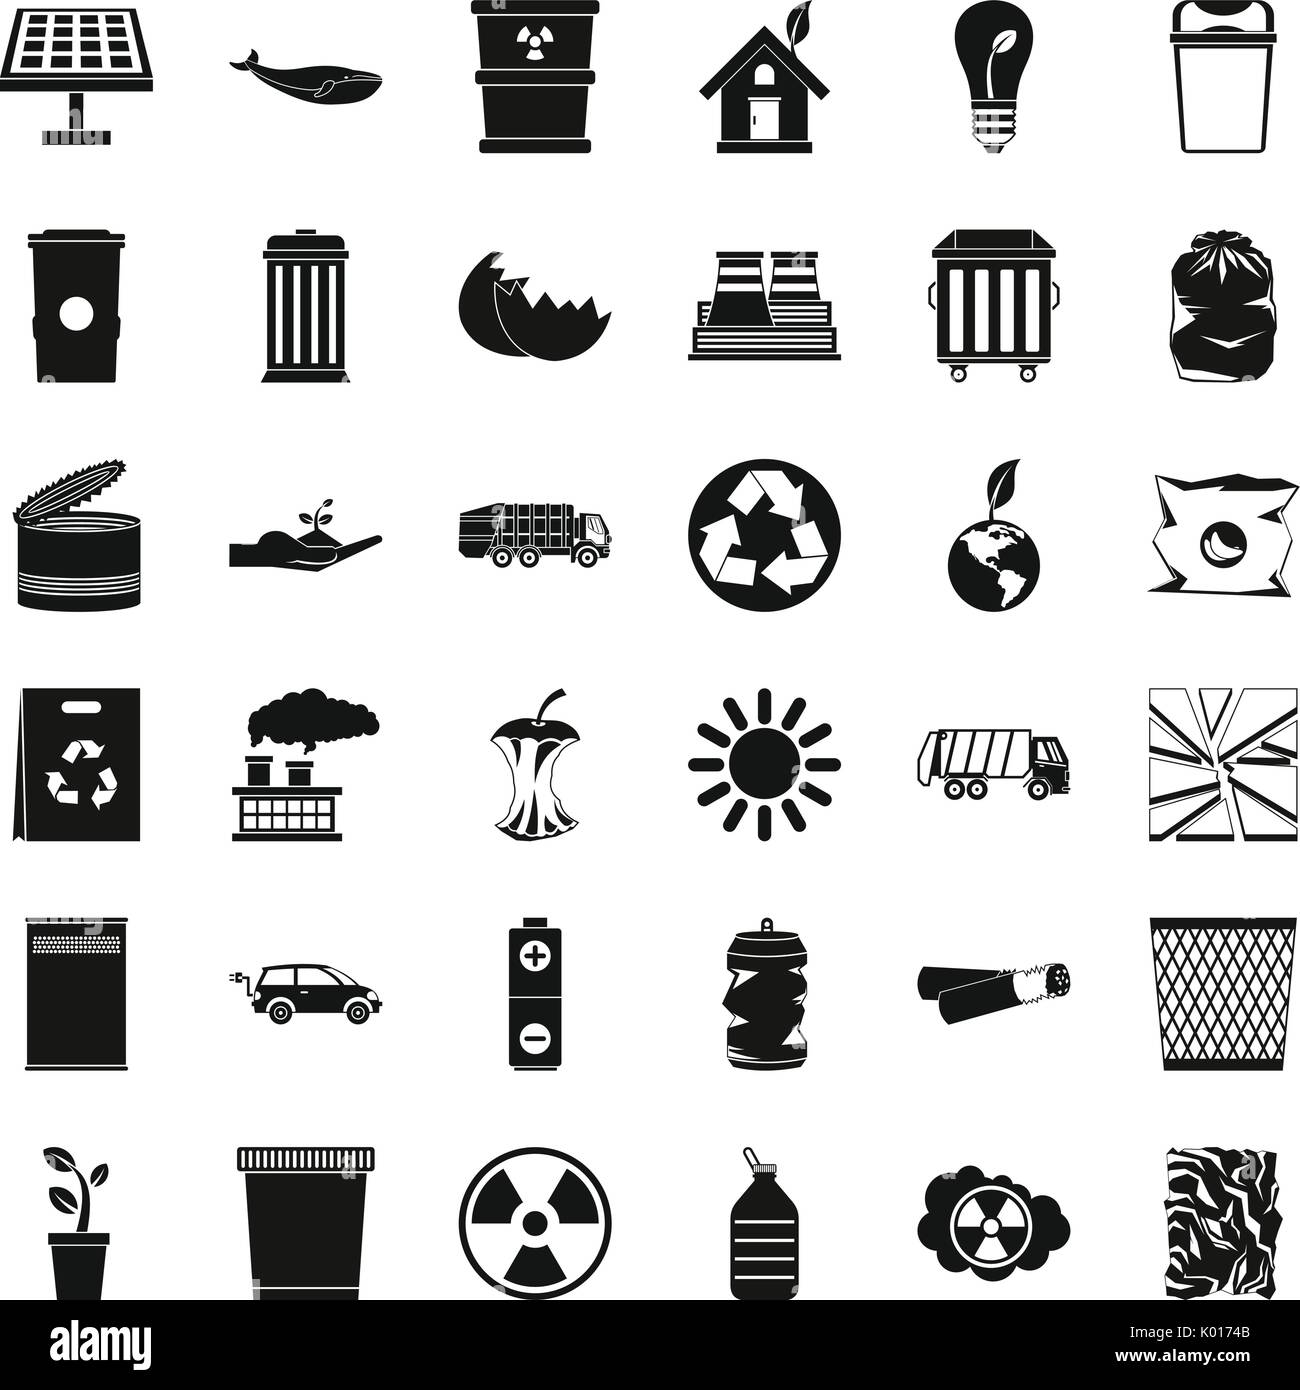 Ecology in planet icons set, simple style Stock Vector